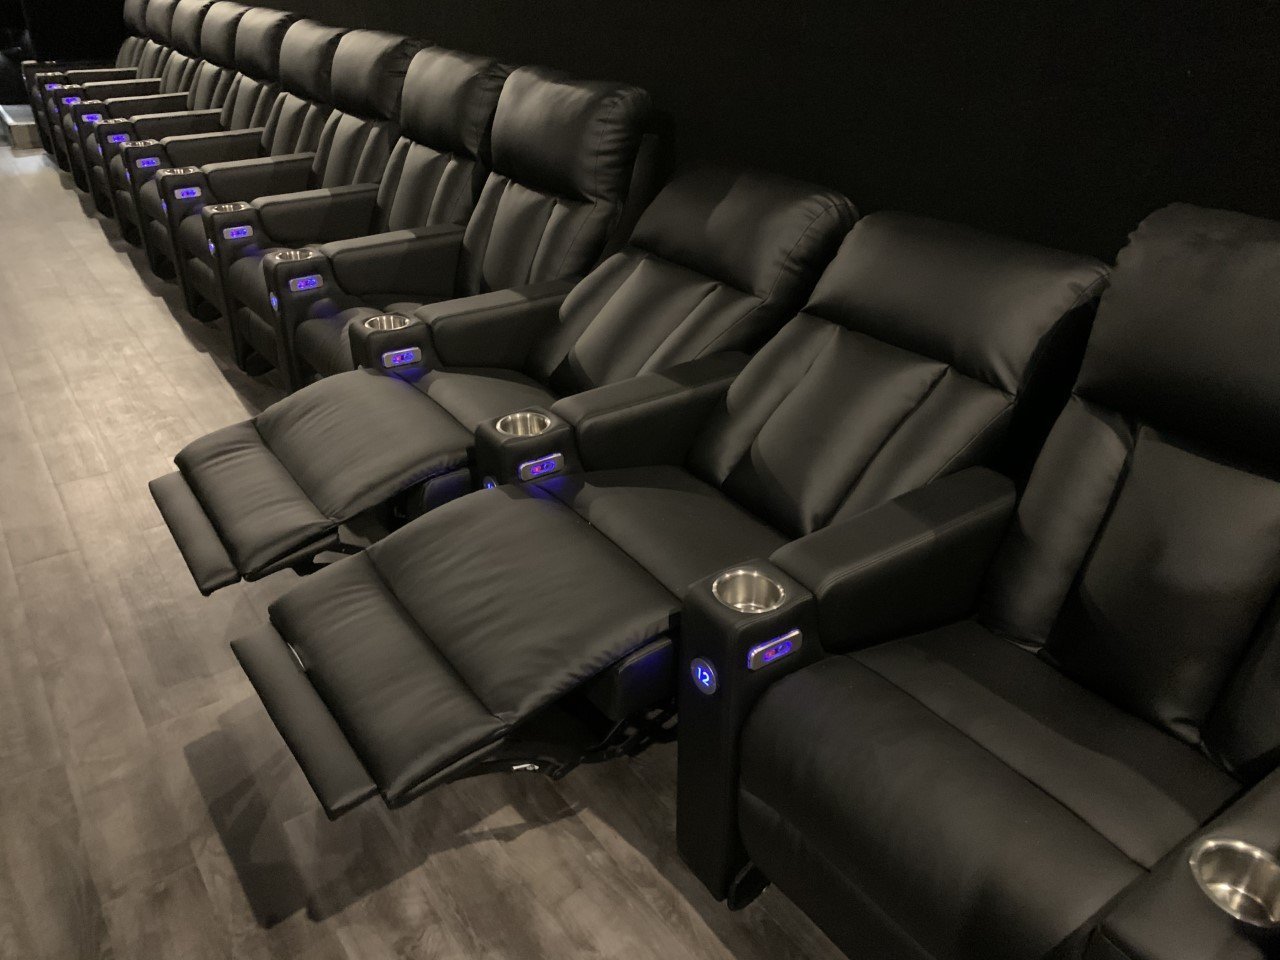 Reclining seats in theater 